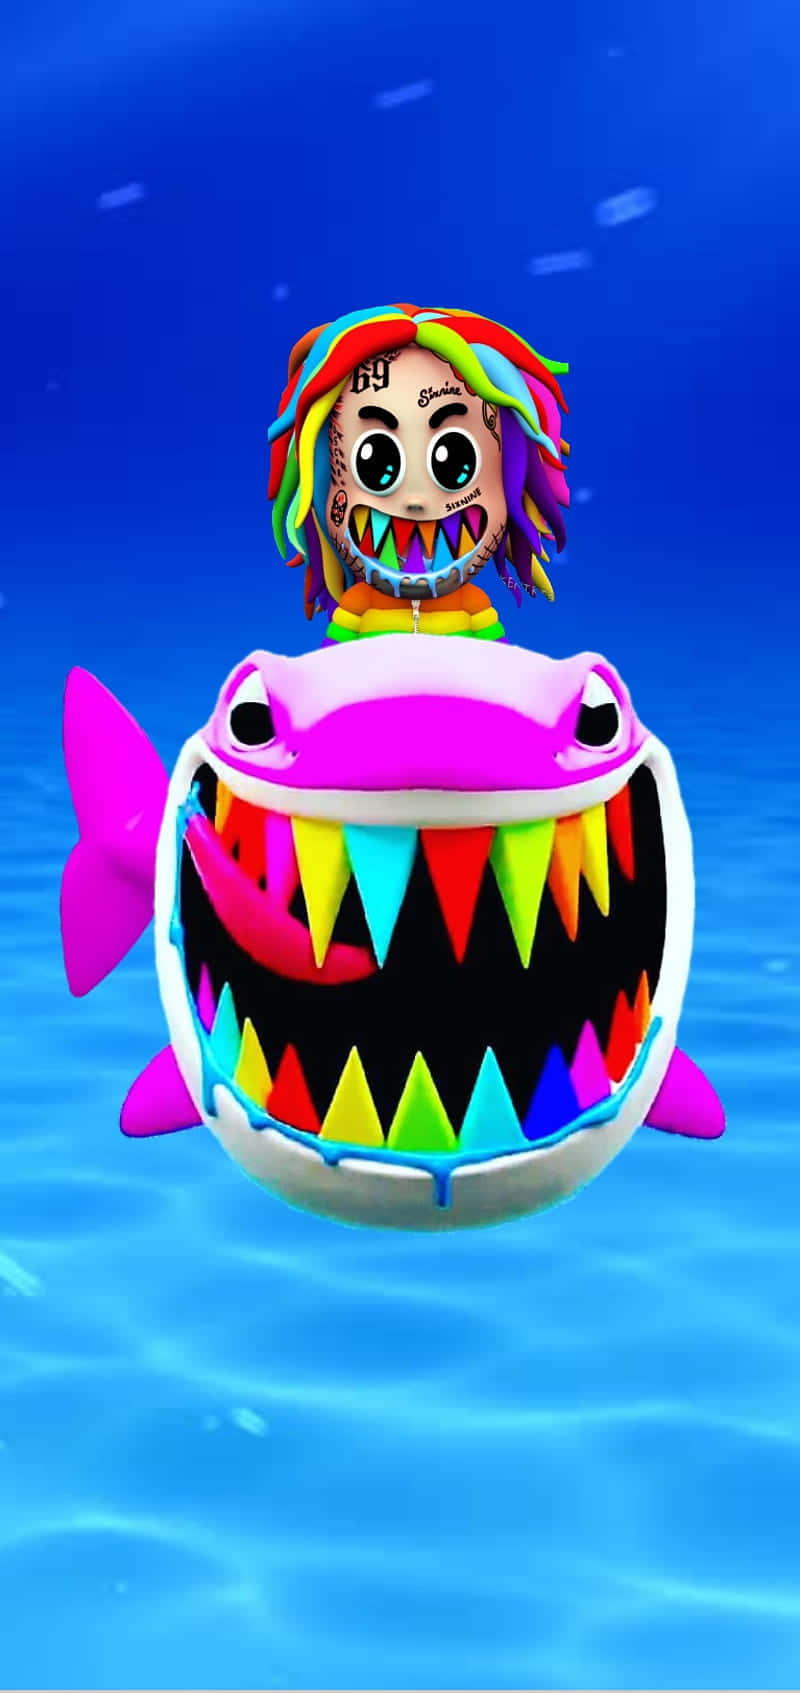 A Cartoon Shark With A Rainbow Colored Mouth Wallpaper